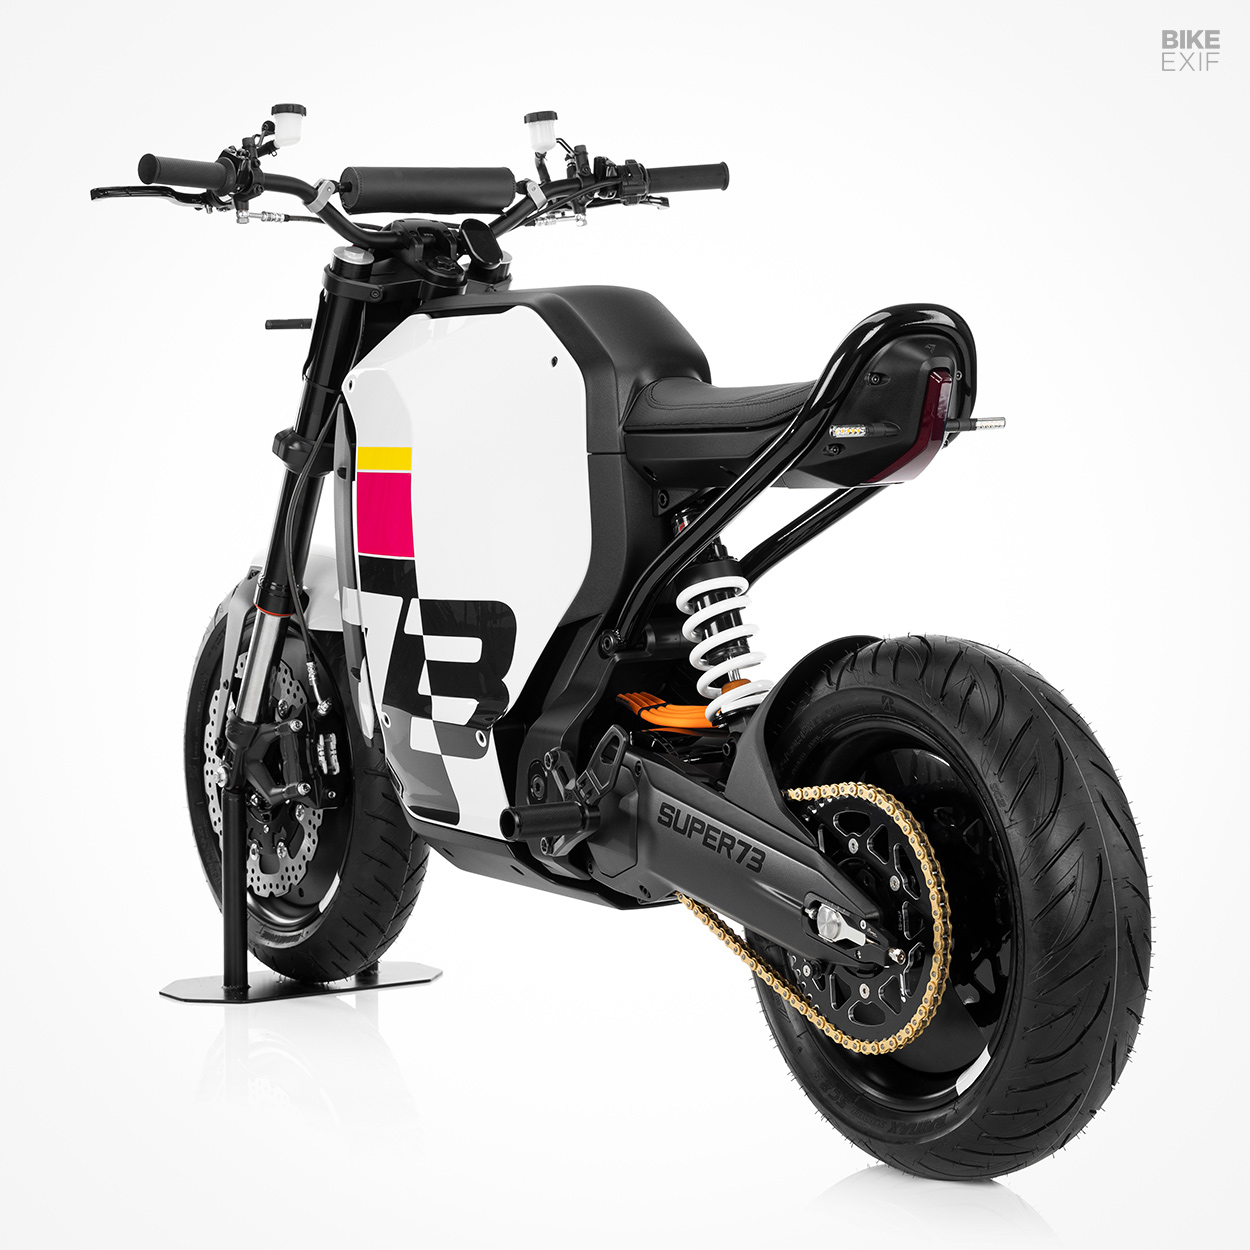 New Super73 C1X electric motorcycle concept